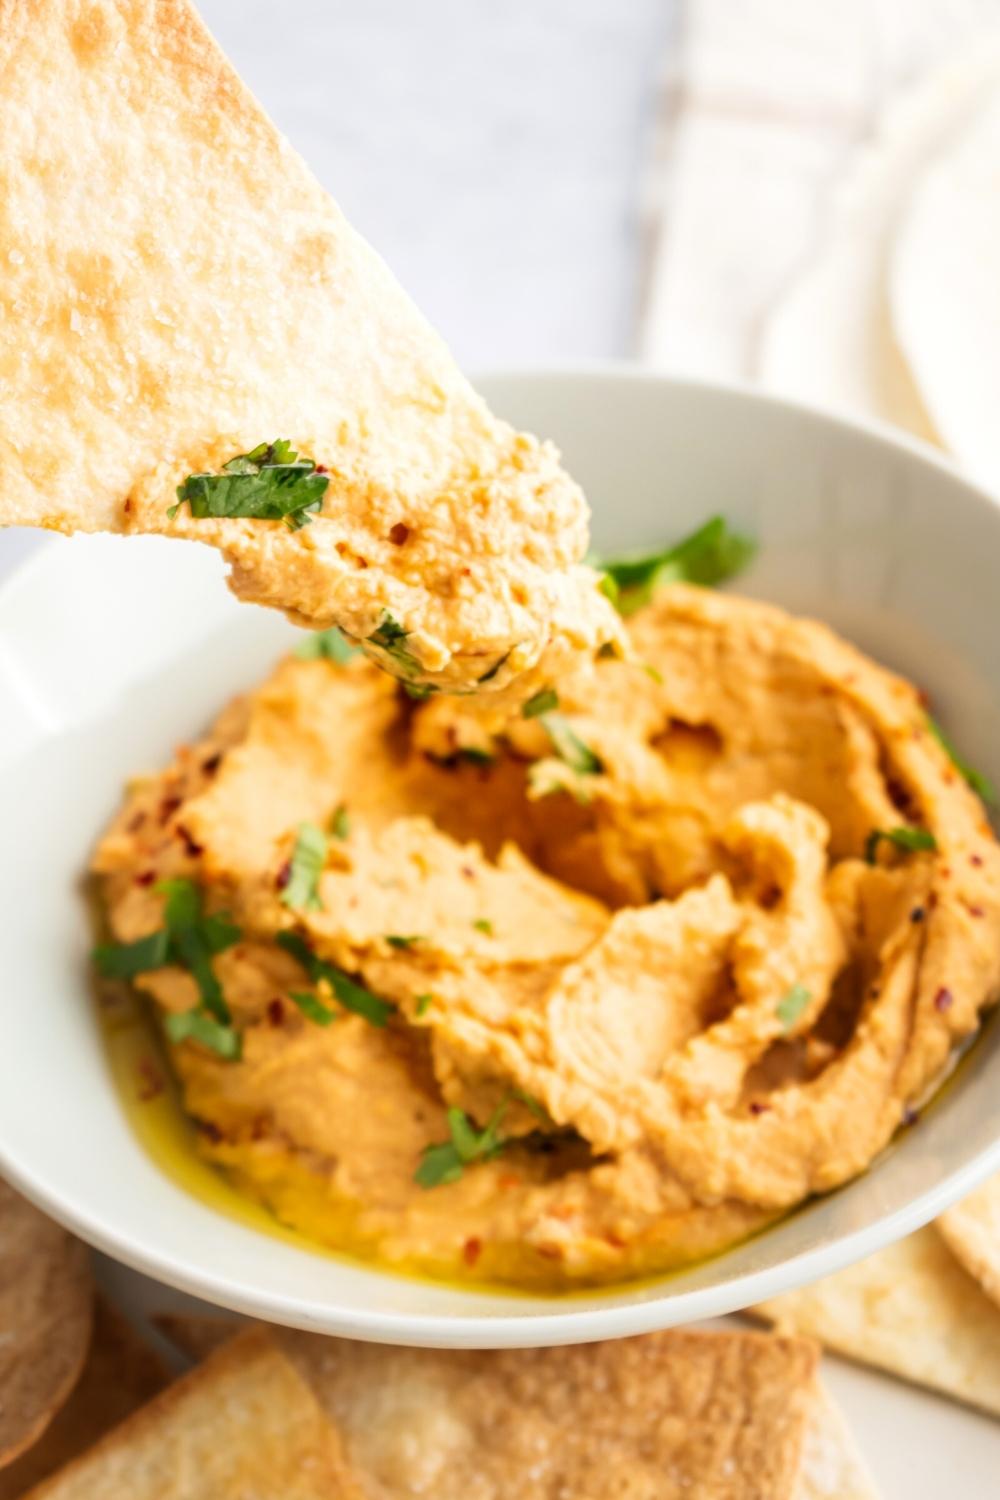 Part of a tortilla chip with hummus on the front of it hovering over spicy hummus in a white bowl.